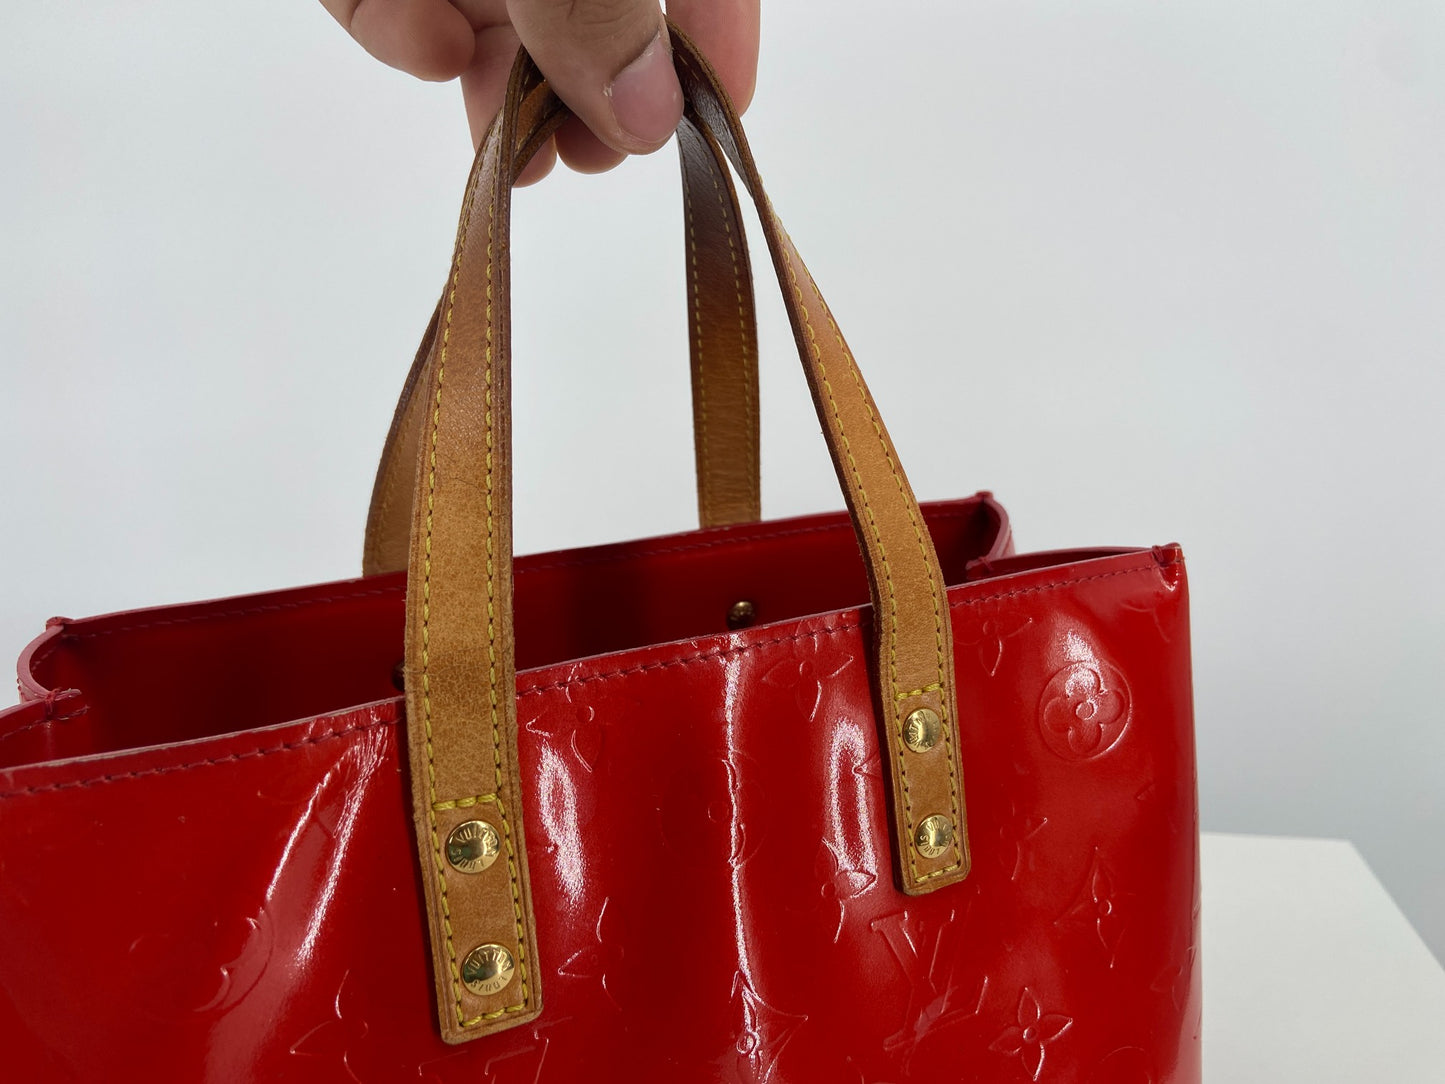 Louis Vuitton Reade PM Red Vernis Leather